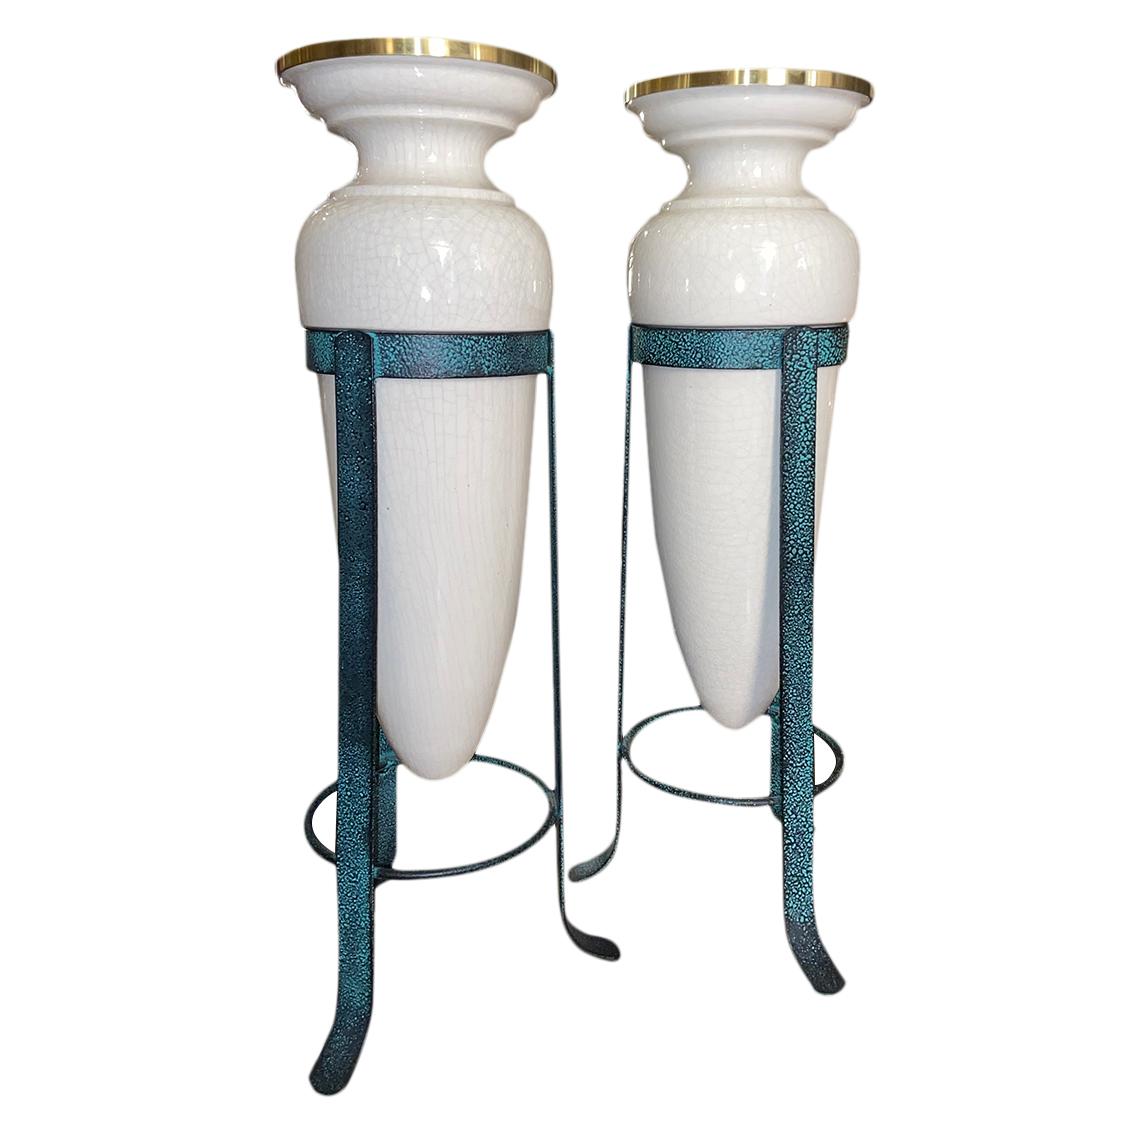 Pair of circa 1950s French porcelain lamps with iron bases, one single interior light each.

Measurements:
Height 23.25